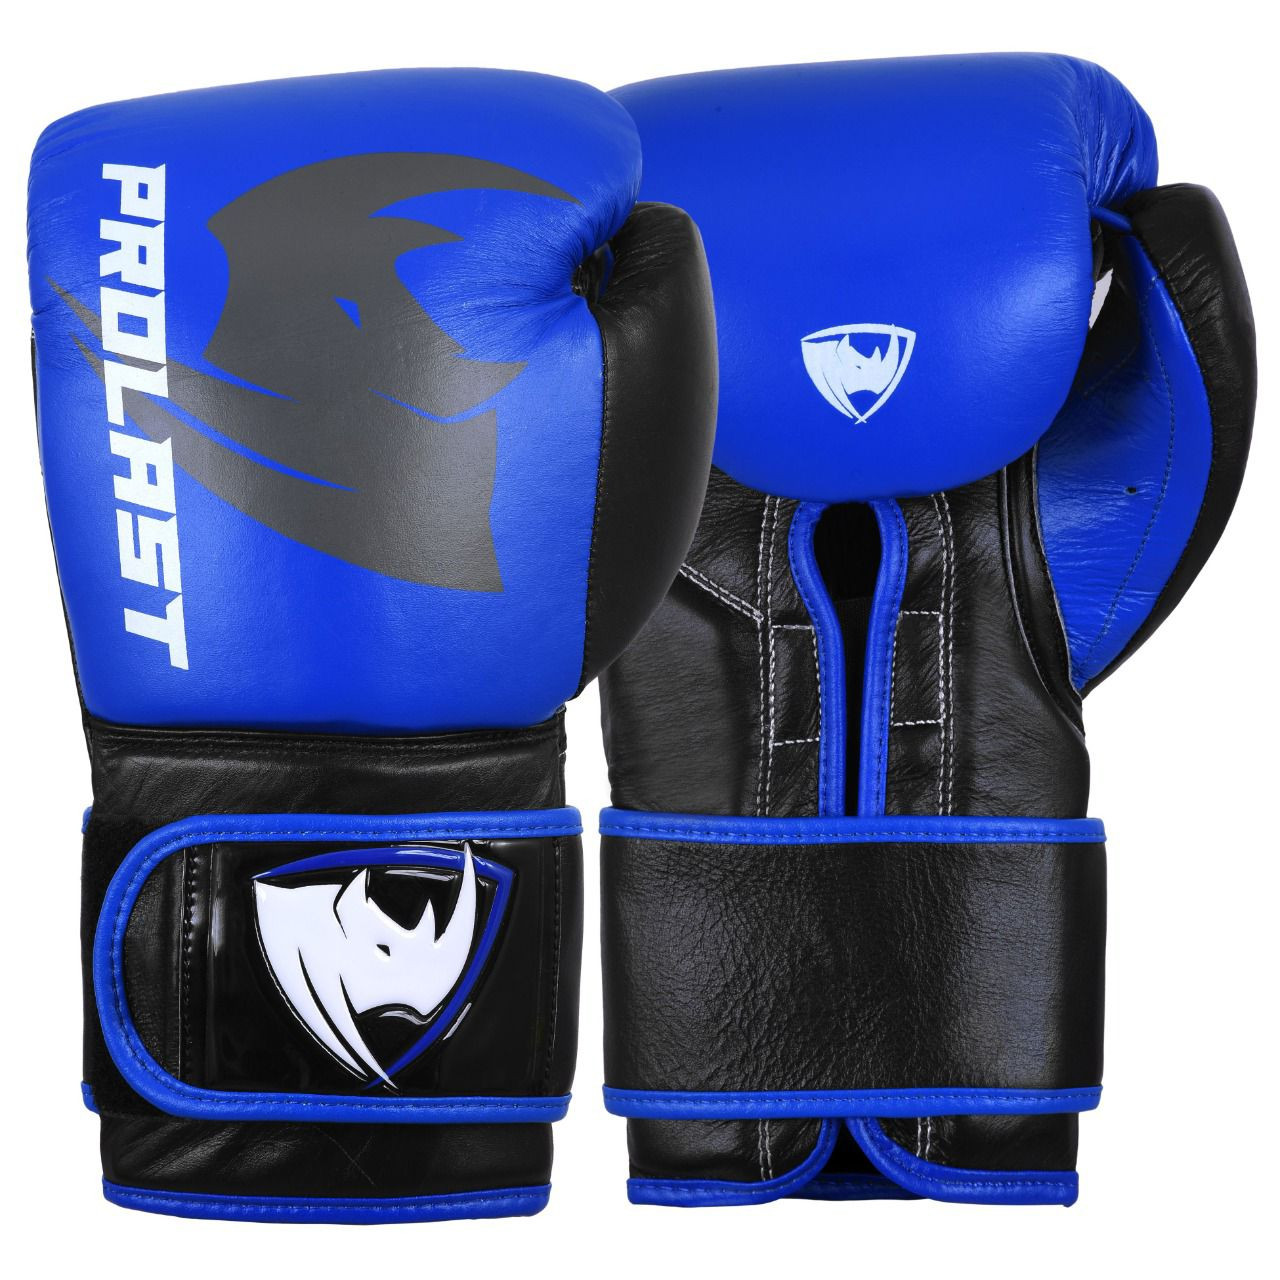 PROLAST LX Training Gloves with Hook and Loop Closure Blue/Black